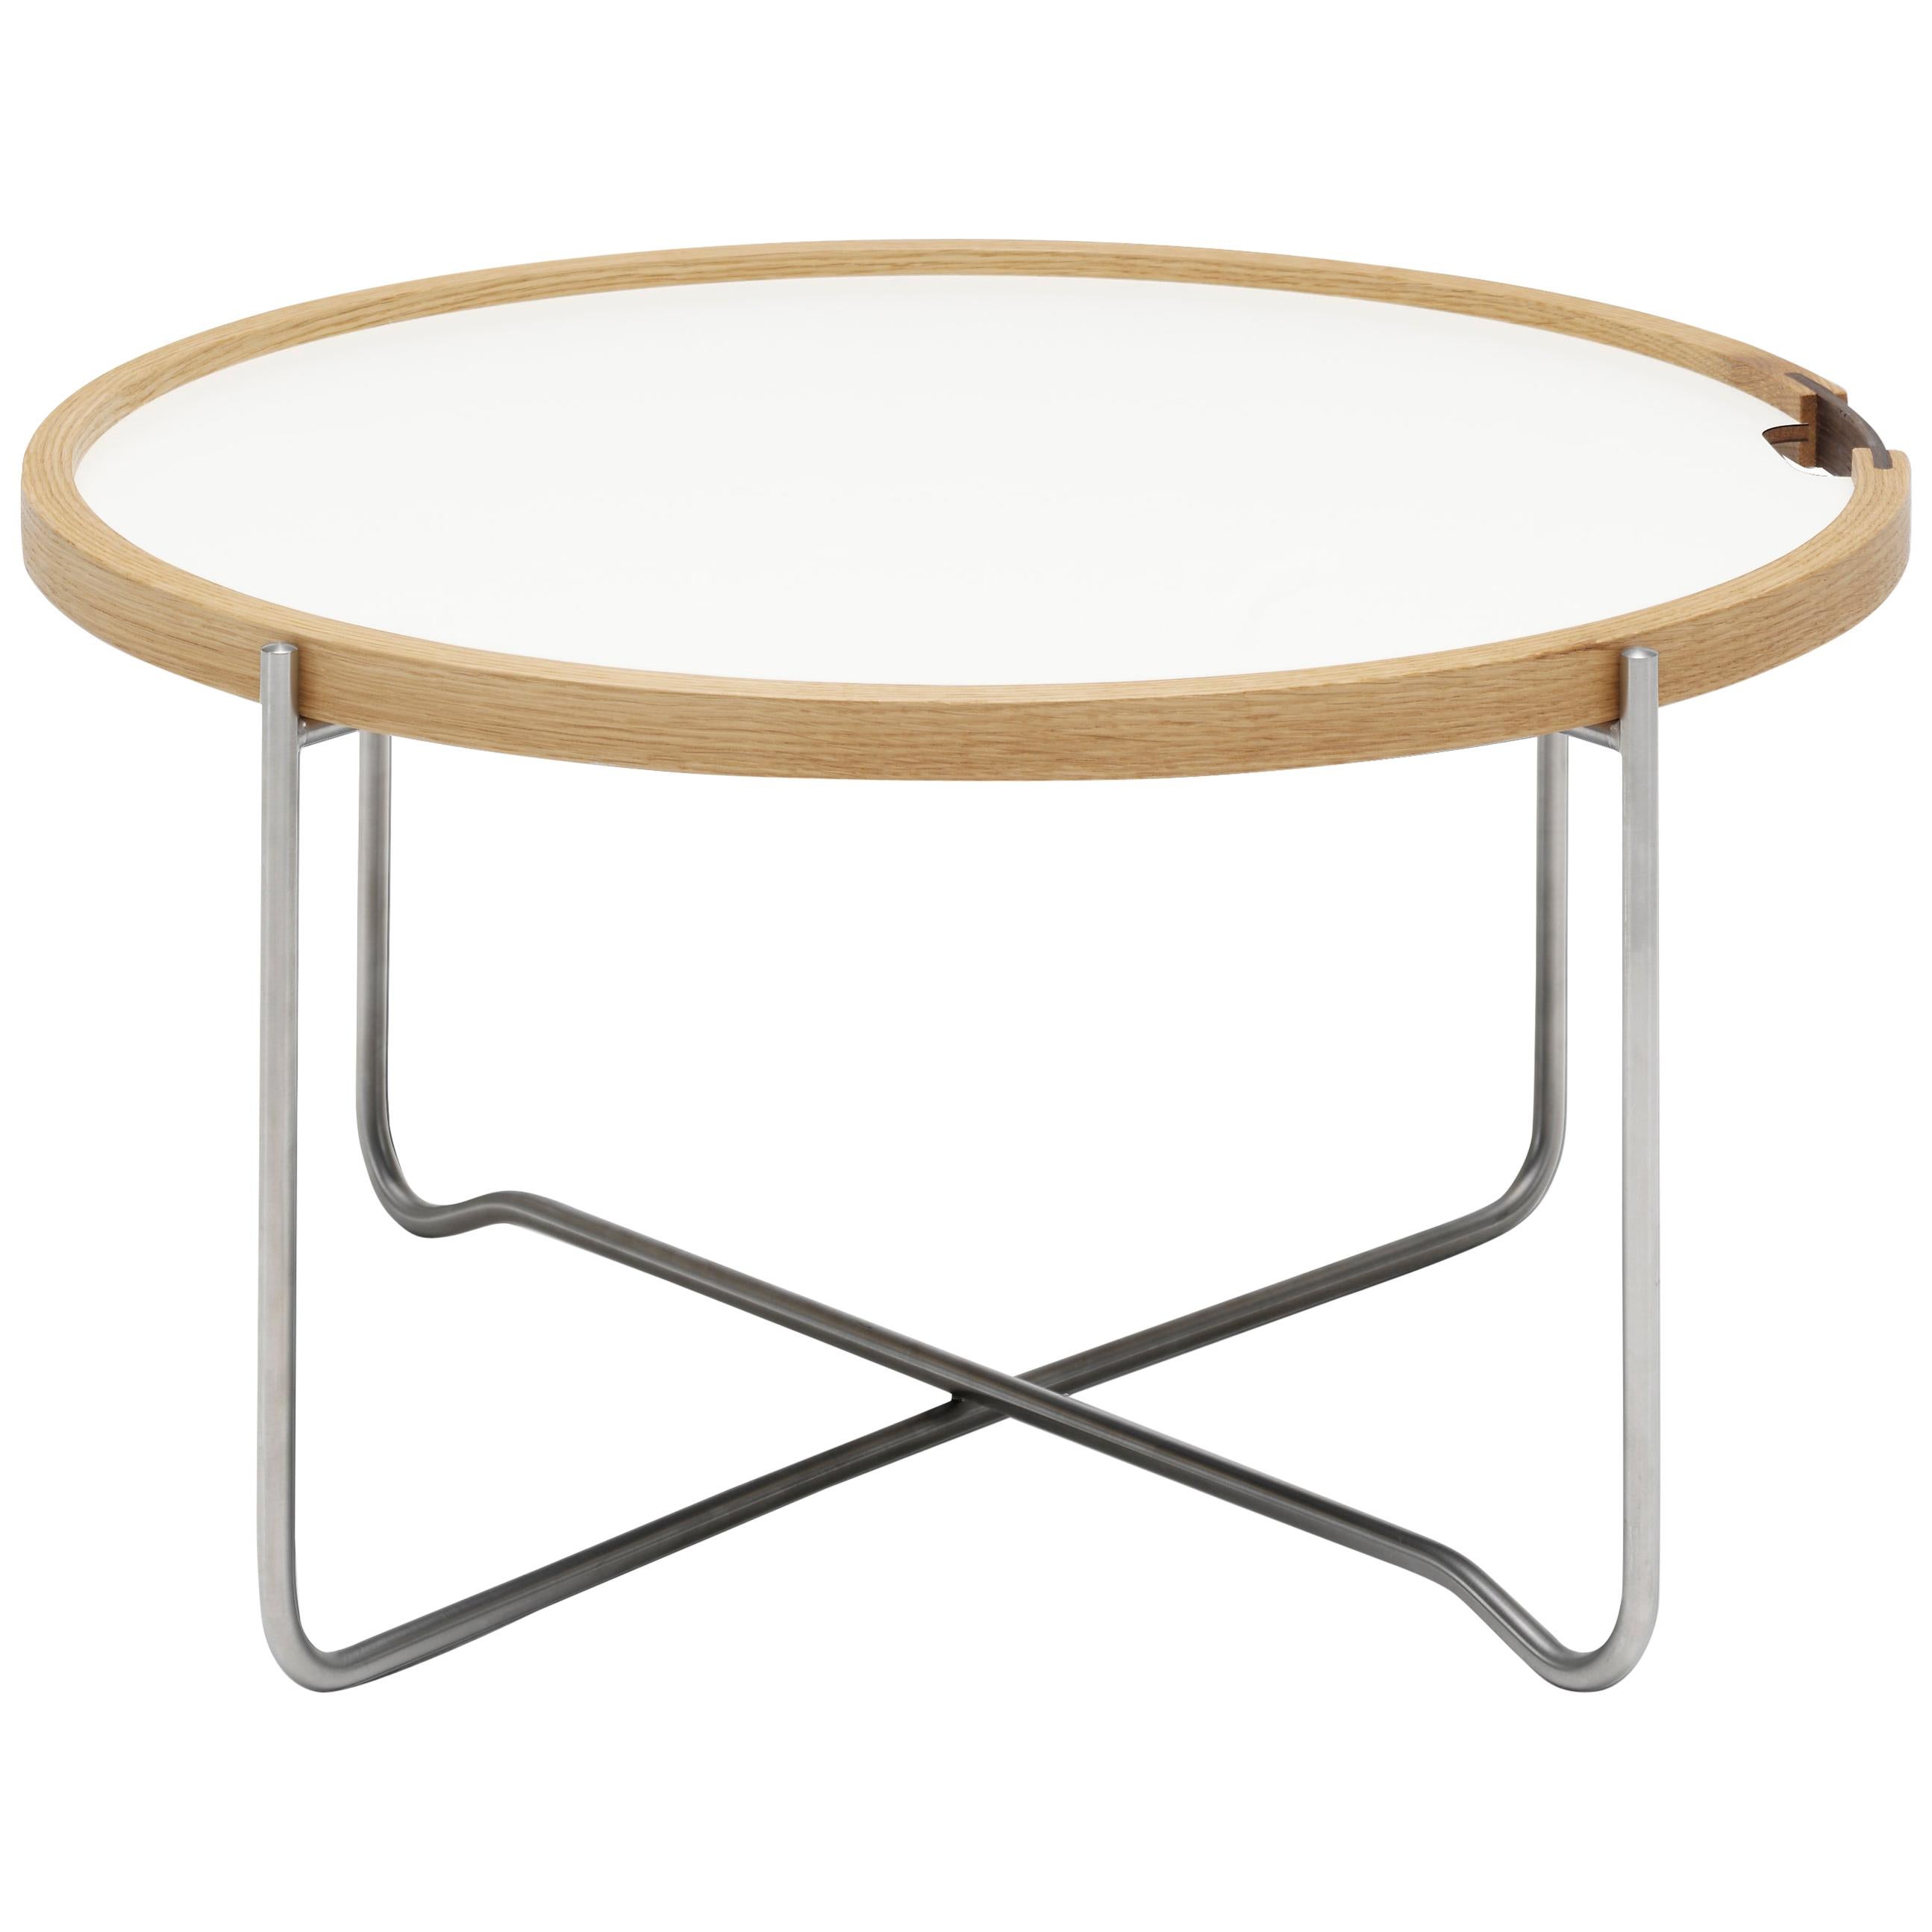 CH417 Reversible Tray Table in Black and White Laminate by Hans J. Wegner